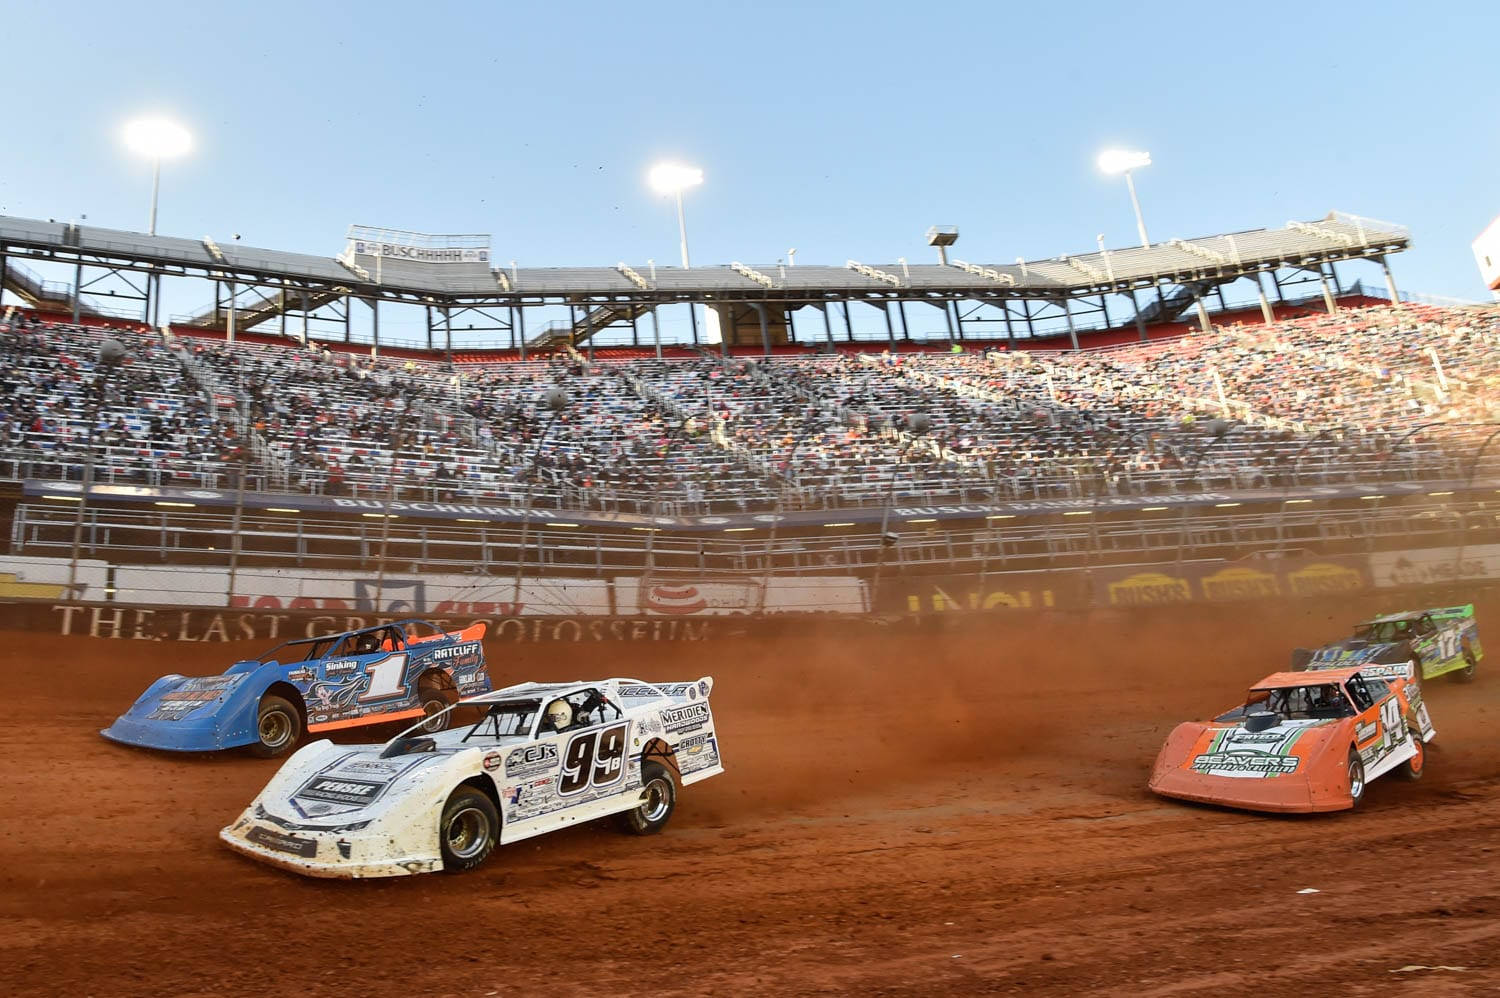 The Dirt Tracks Will Make for an Exciting Race Wallpaper